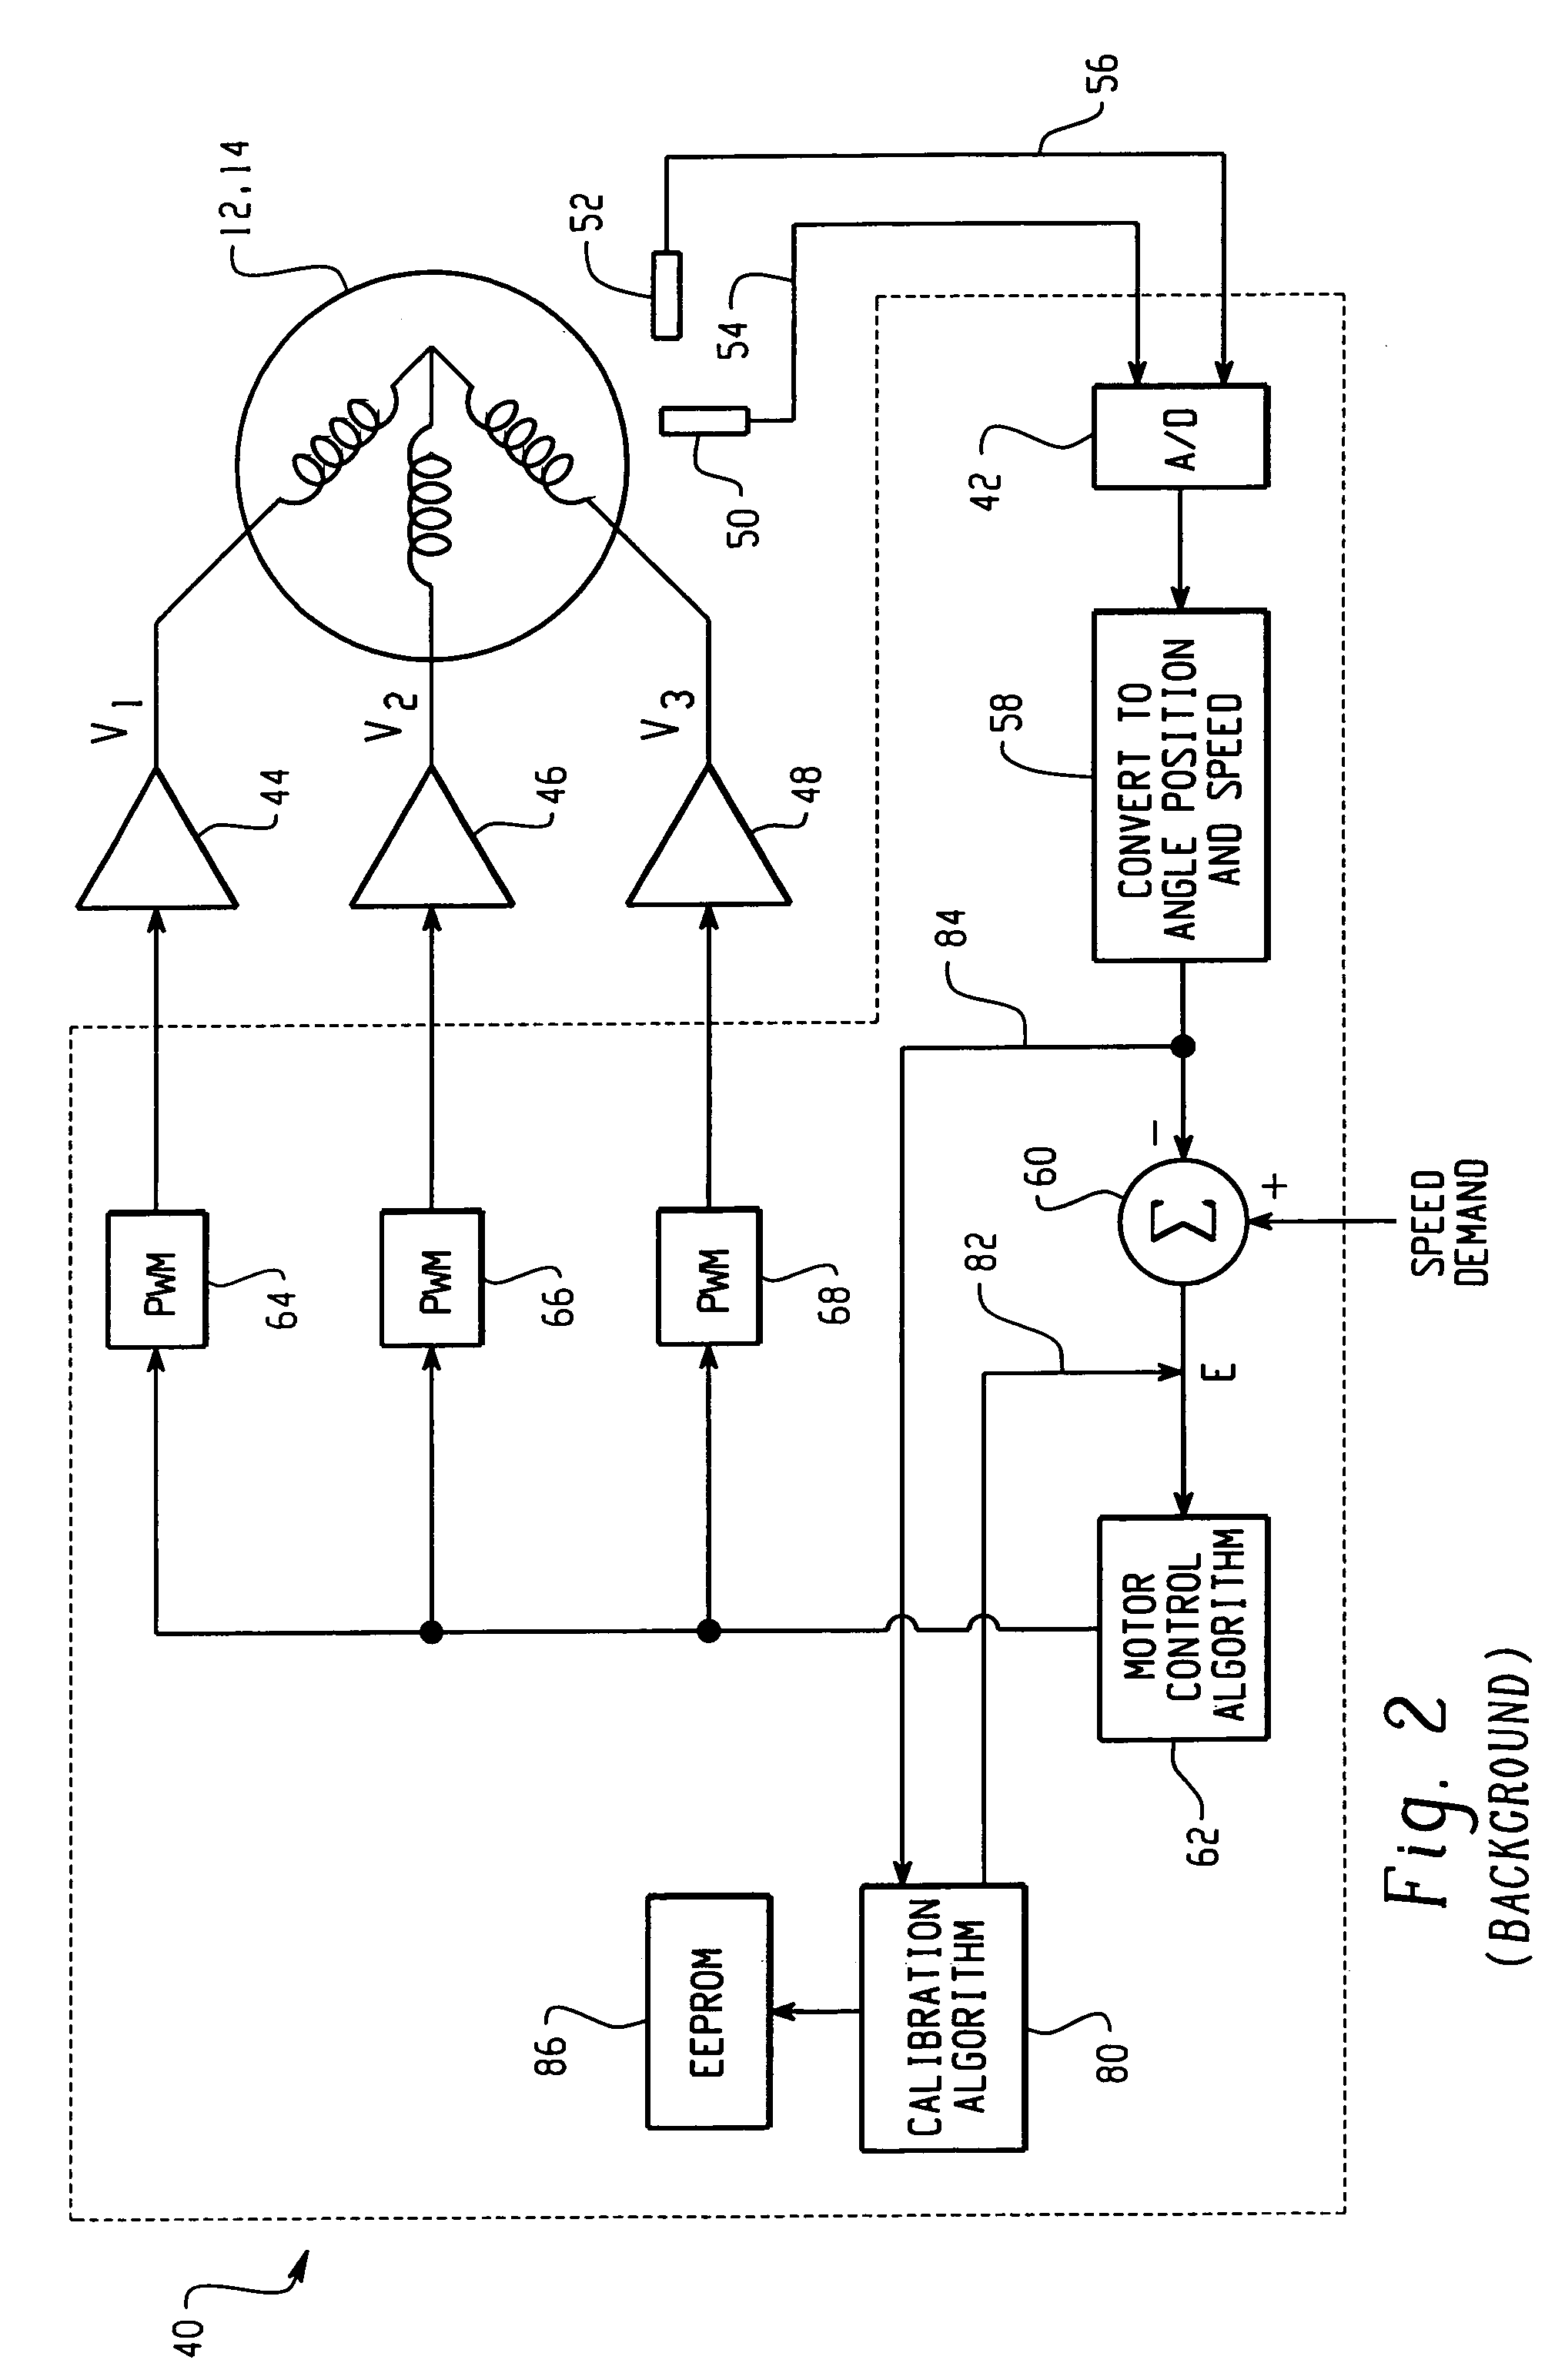 Method and apparatus for embedding motor error parameter data in a drive motor of a power driven wheelchair